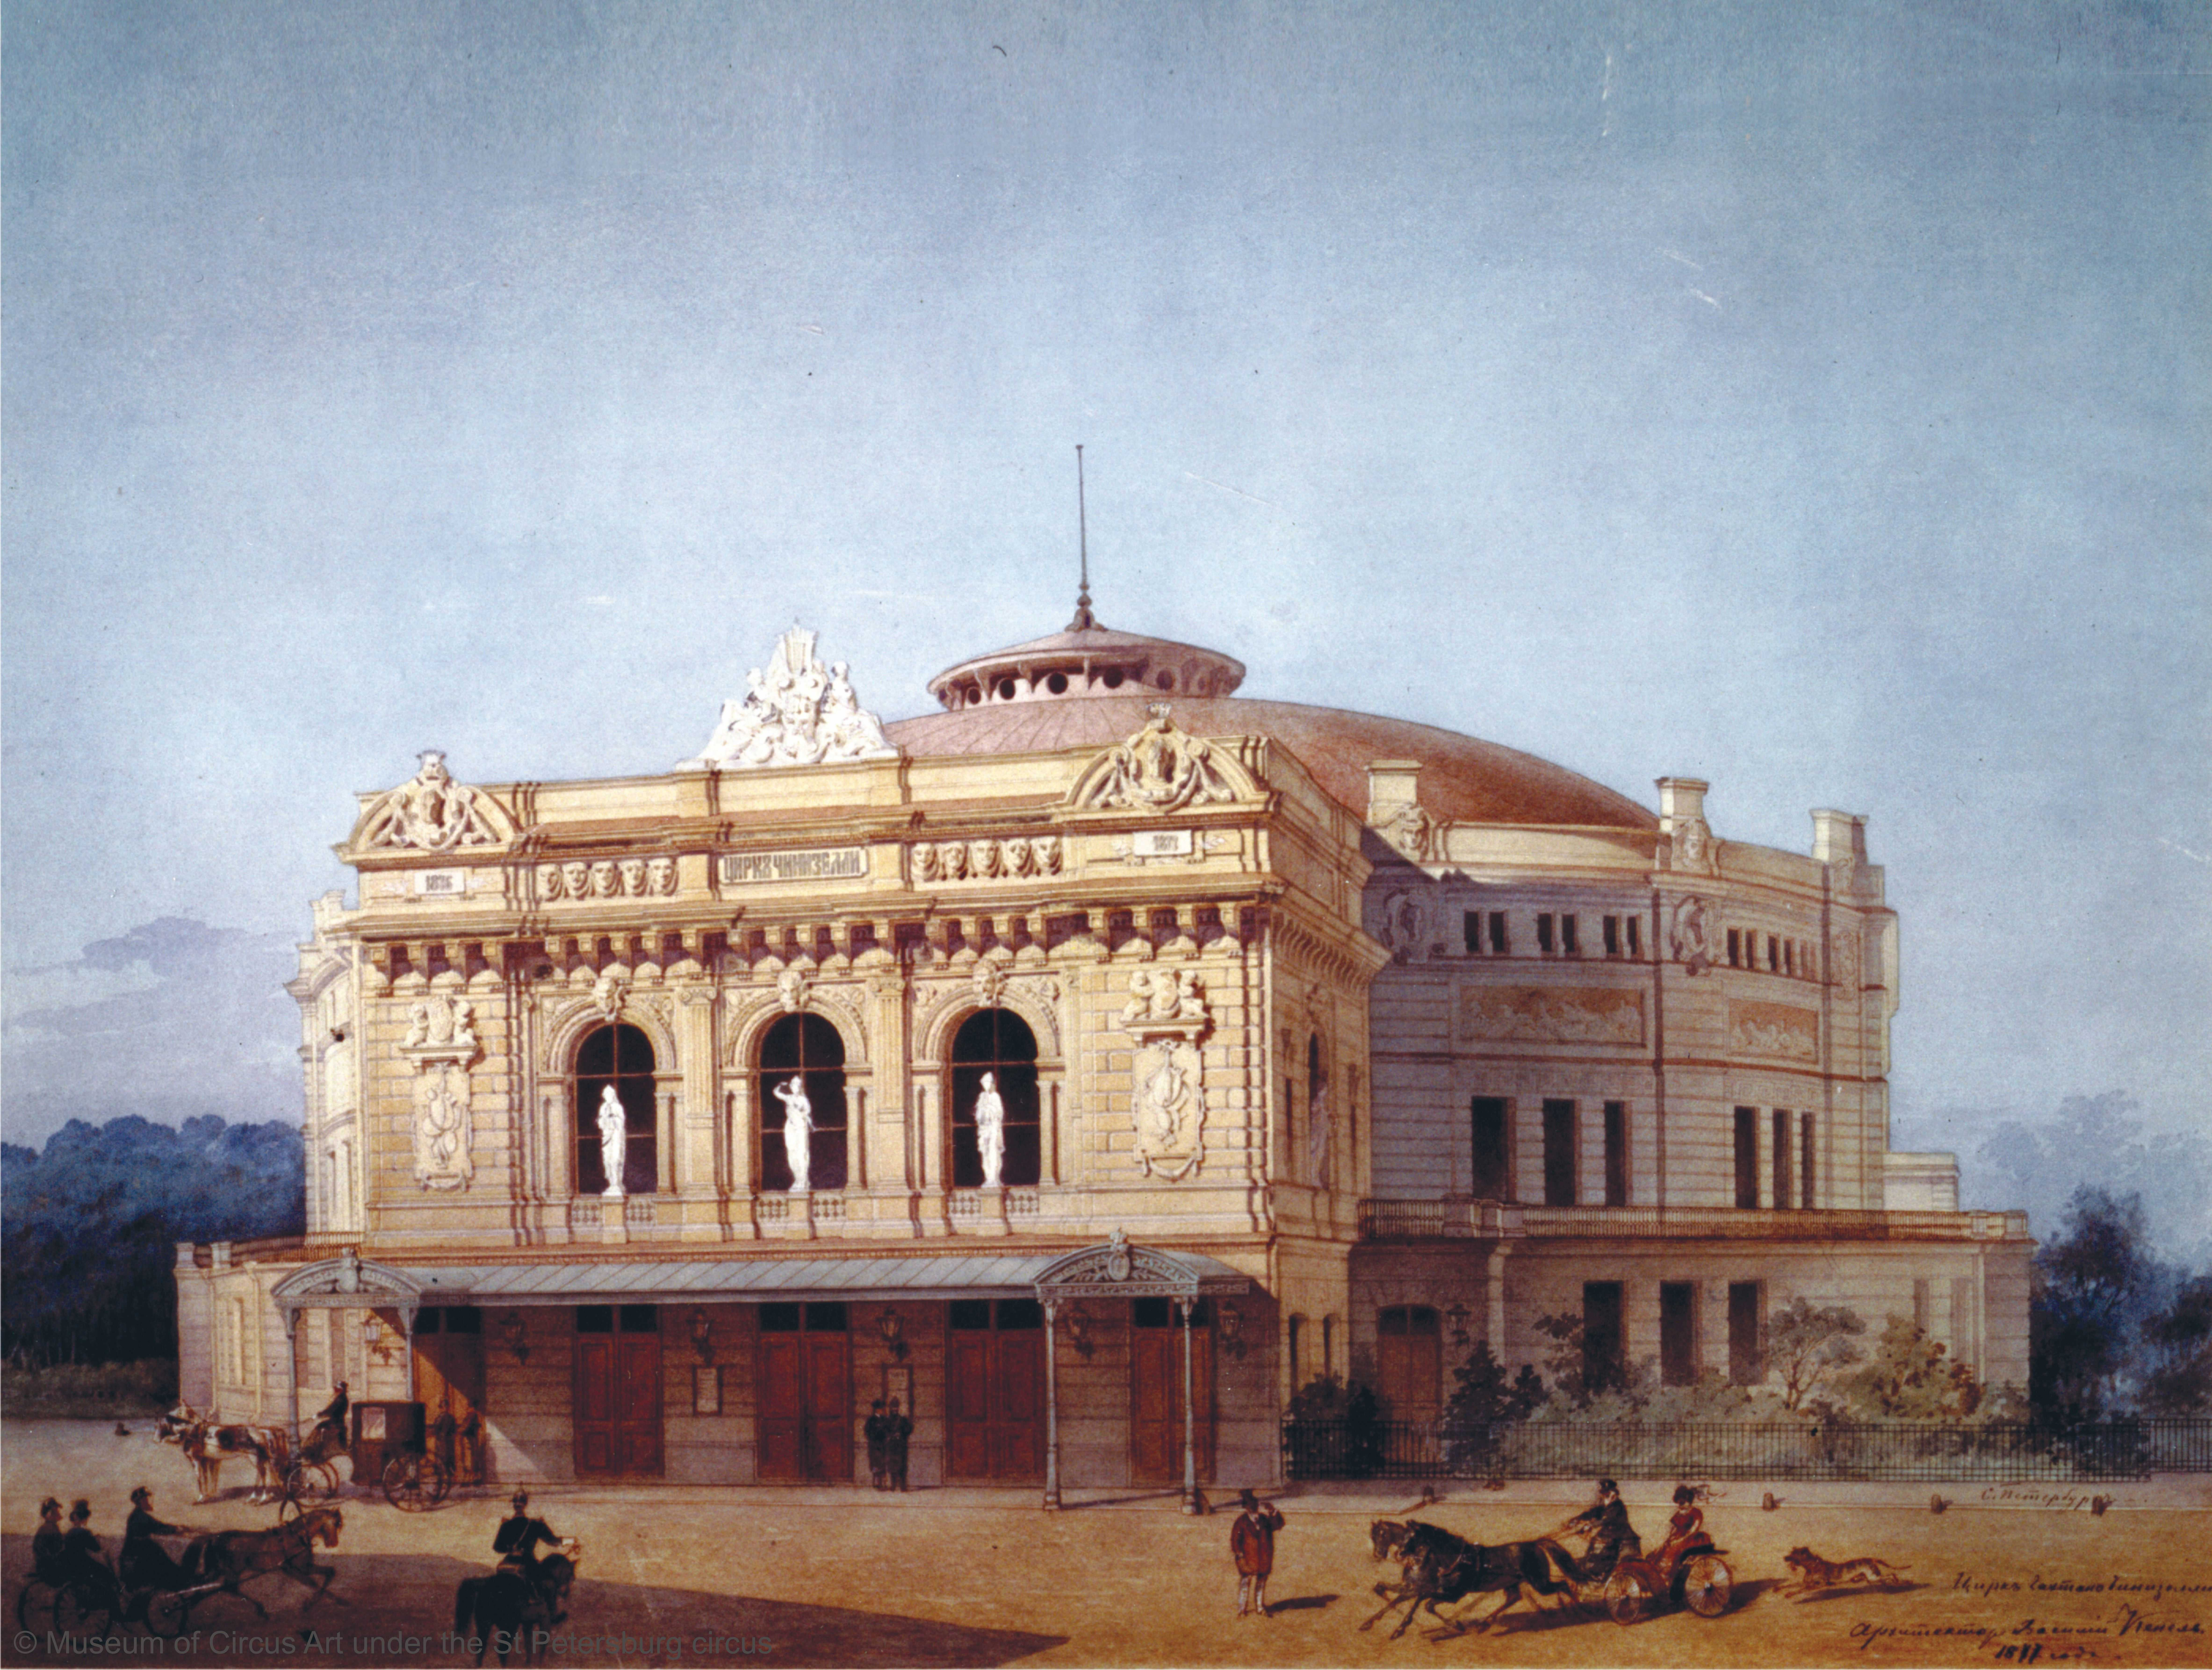 Painting of the exterior of the The Ciniselli Circus building